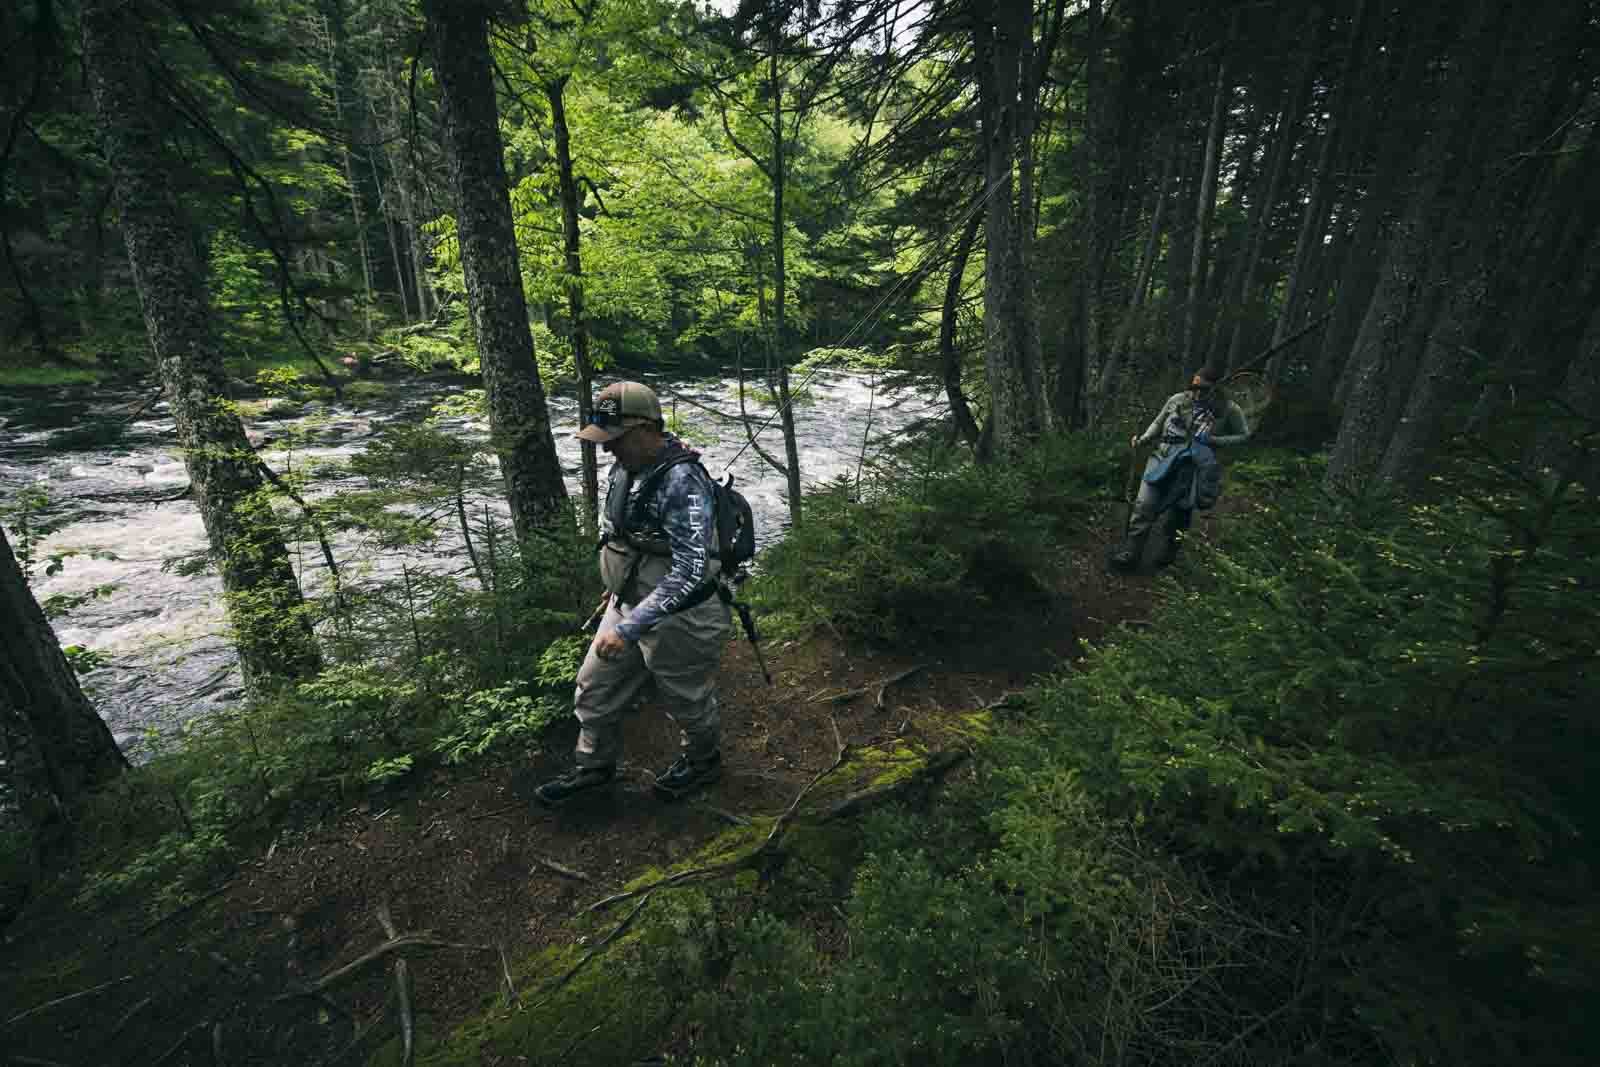  Bev (she/her) and  Megan  (she/her) walk alongside a river in western Maine, following a trail through conifers and undergrowth. Photo:  Joe Klementovich  